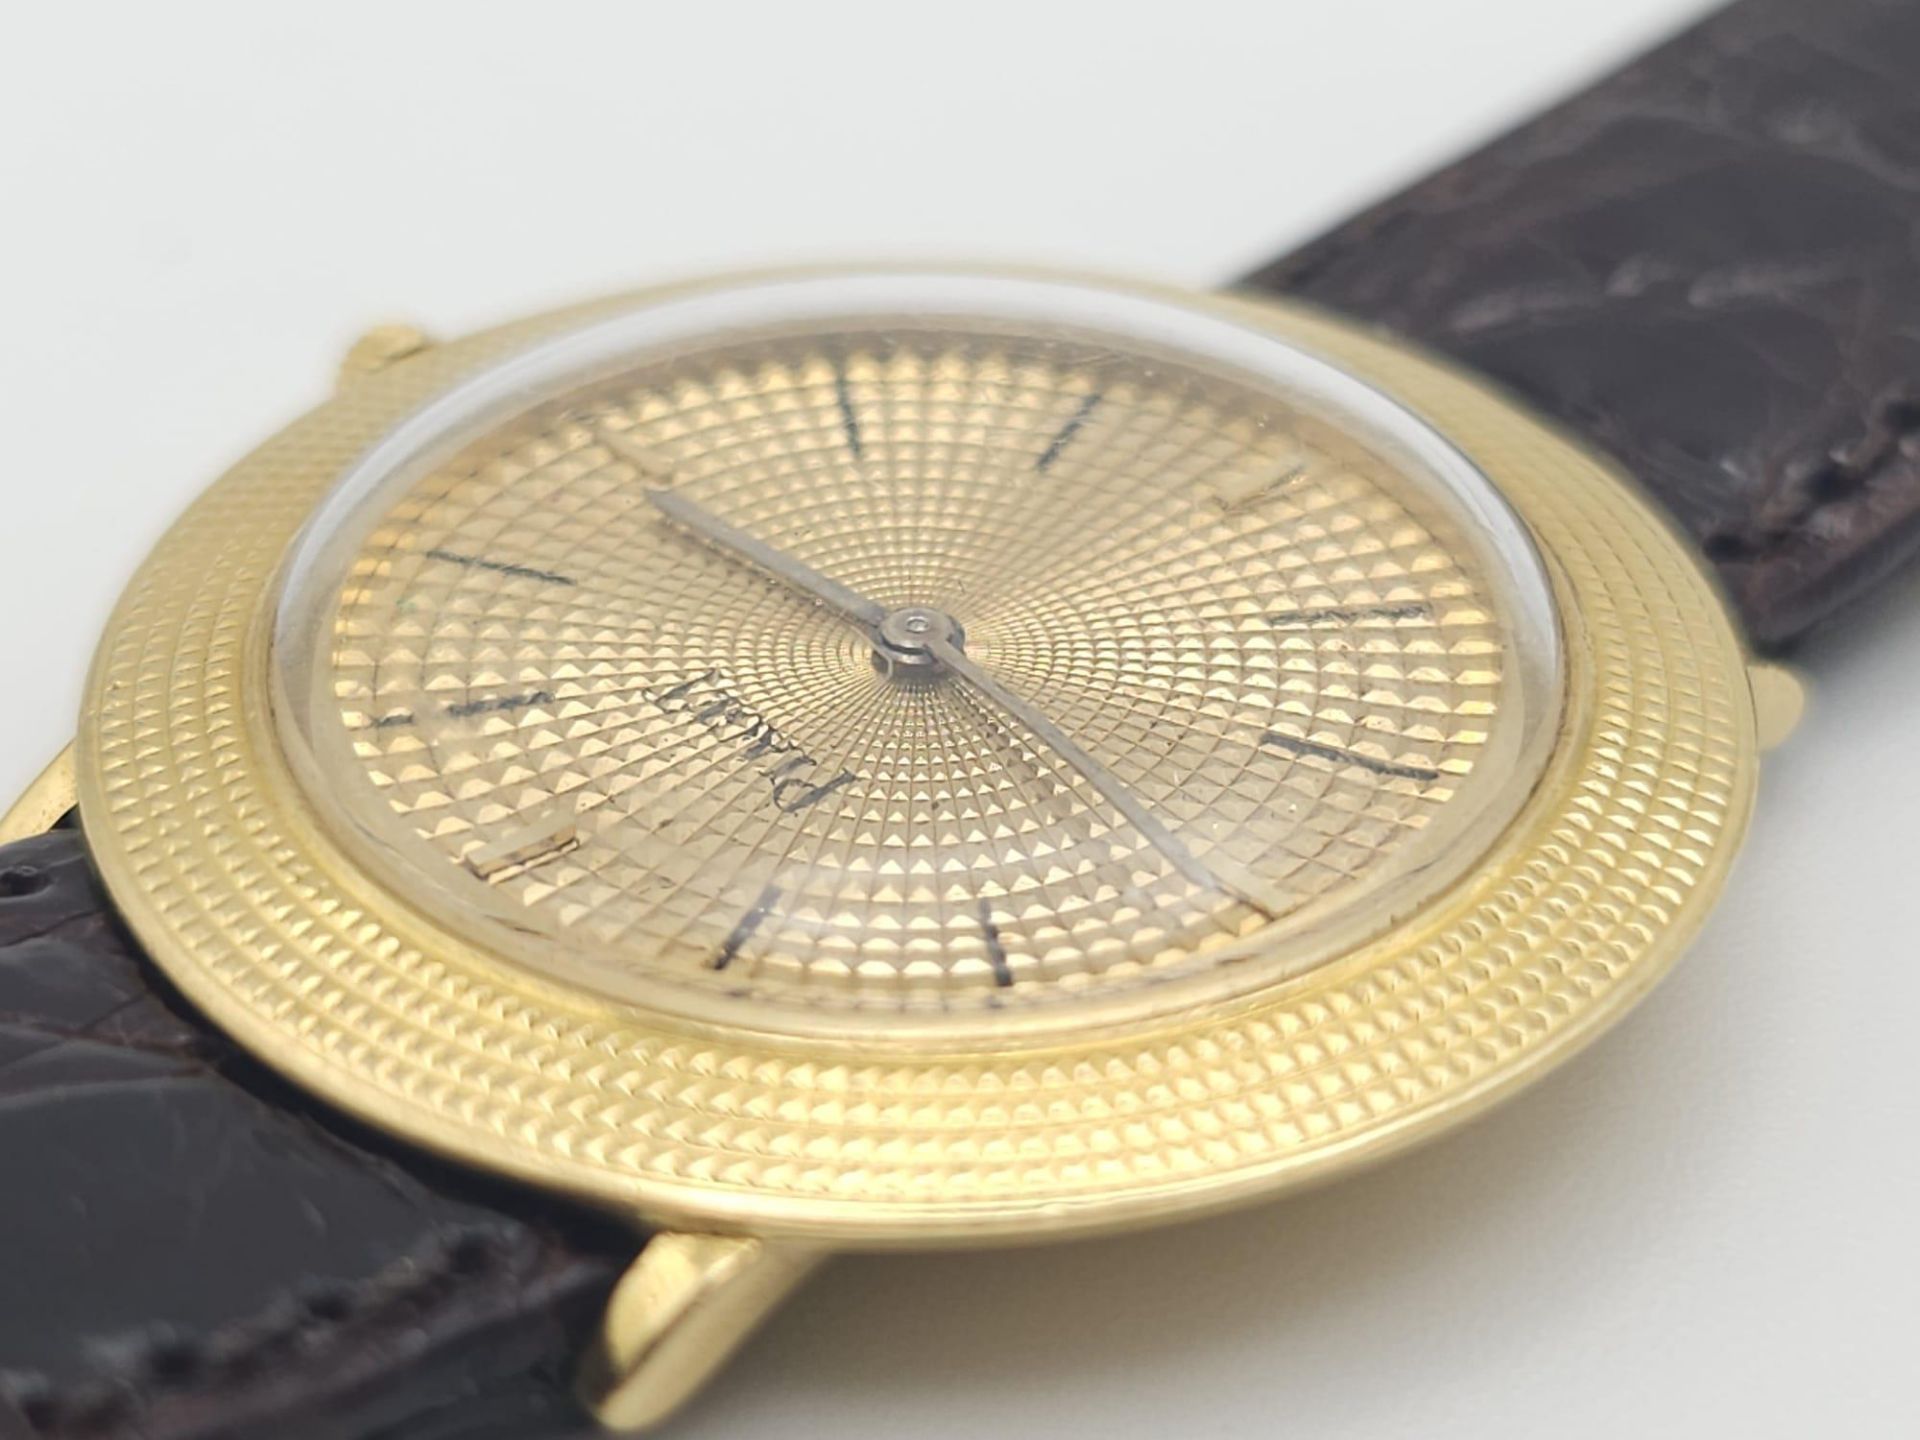 A Vintage 18K Gold Piaget Gents Watch with Hypnotic Dial. Brown crocodile strap. 18k gold case - - Image 13 of 25